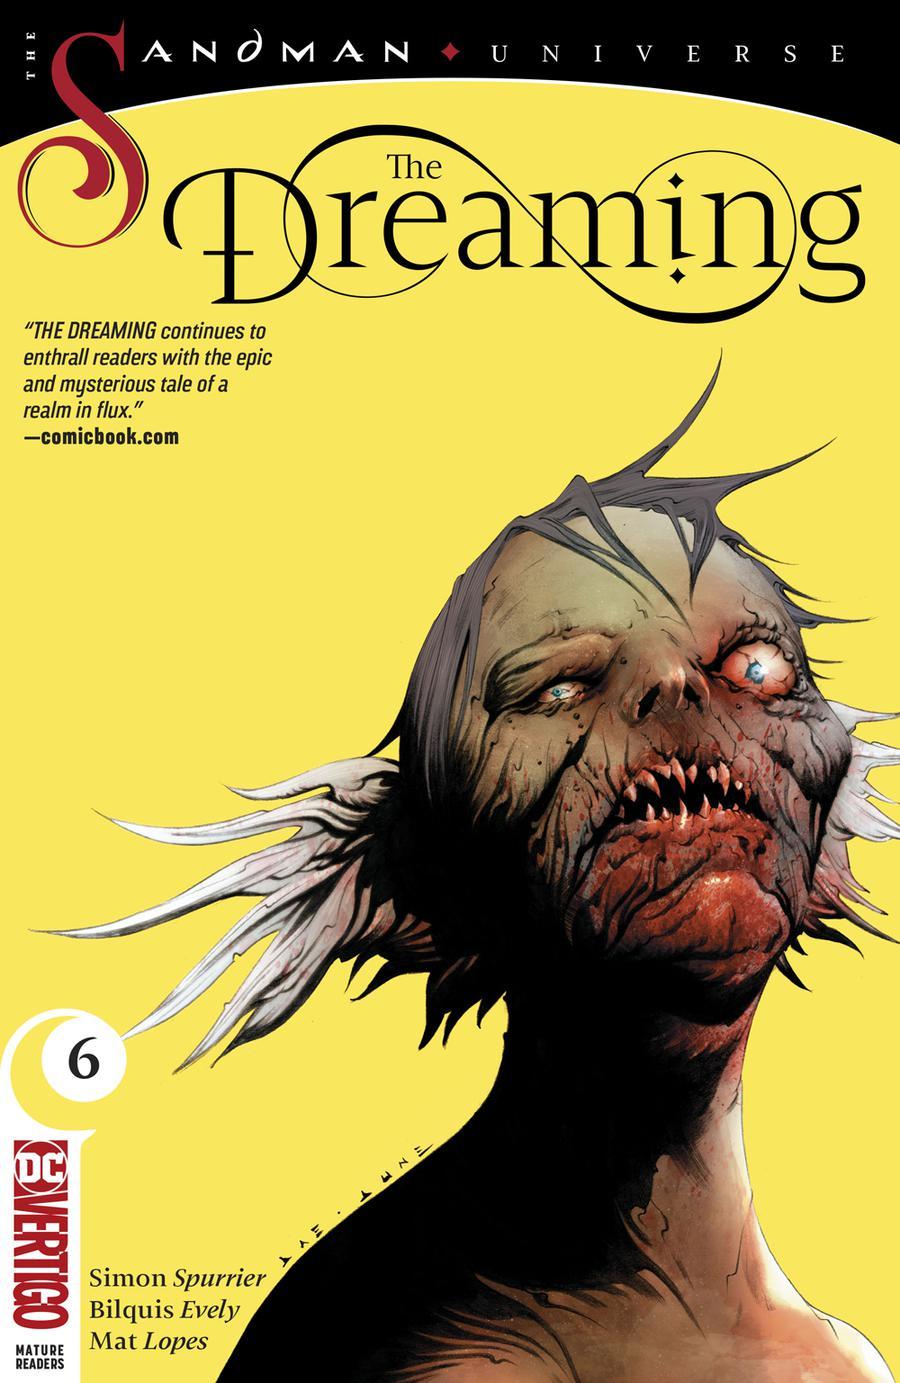 The Dreaming Vol. 2 #6